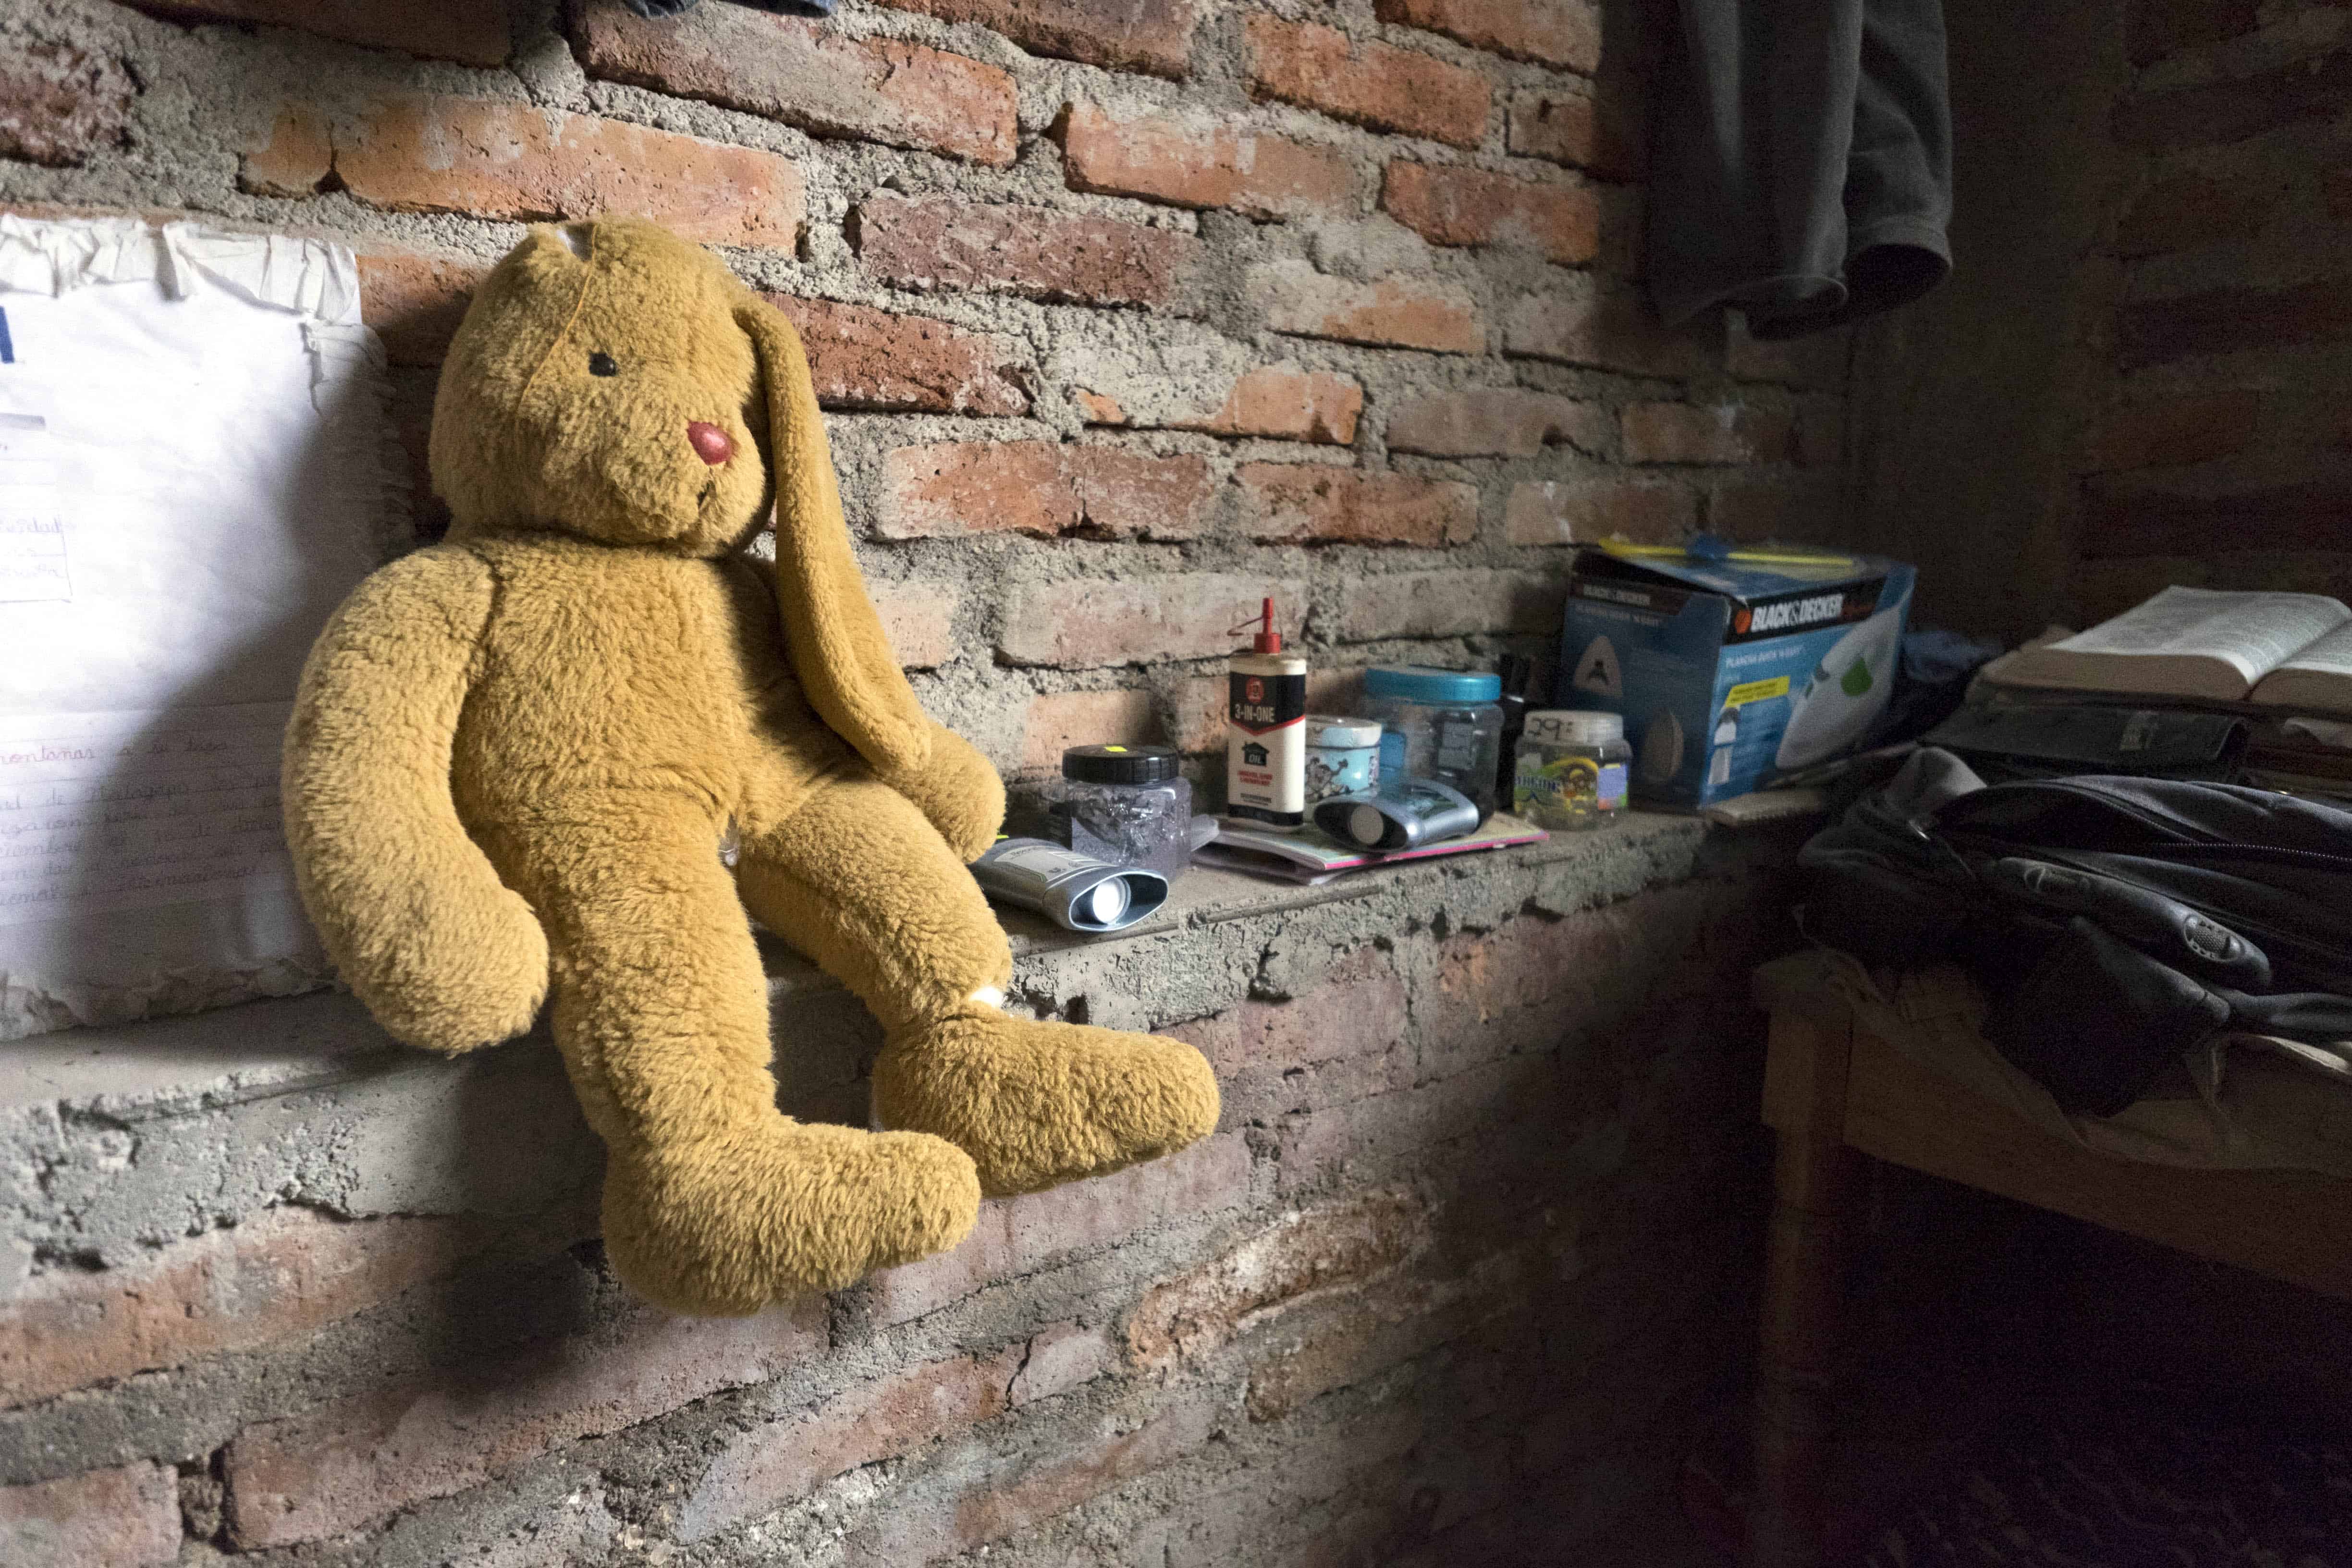 Inside Pedro's room in Matagalpa. An old stuffed rabbit sits on the wall.